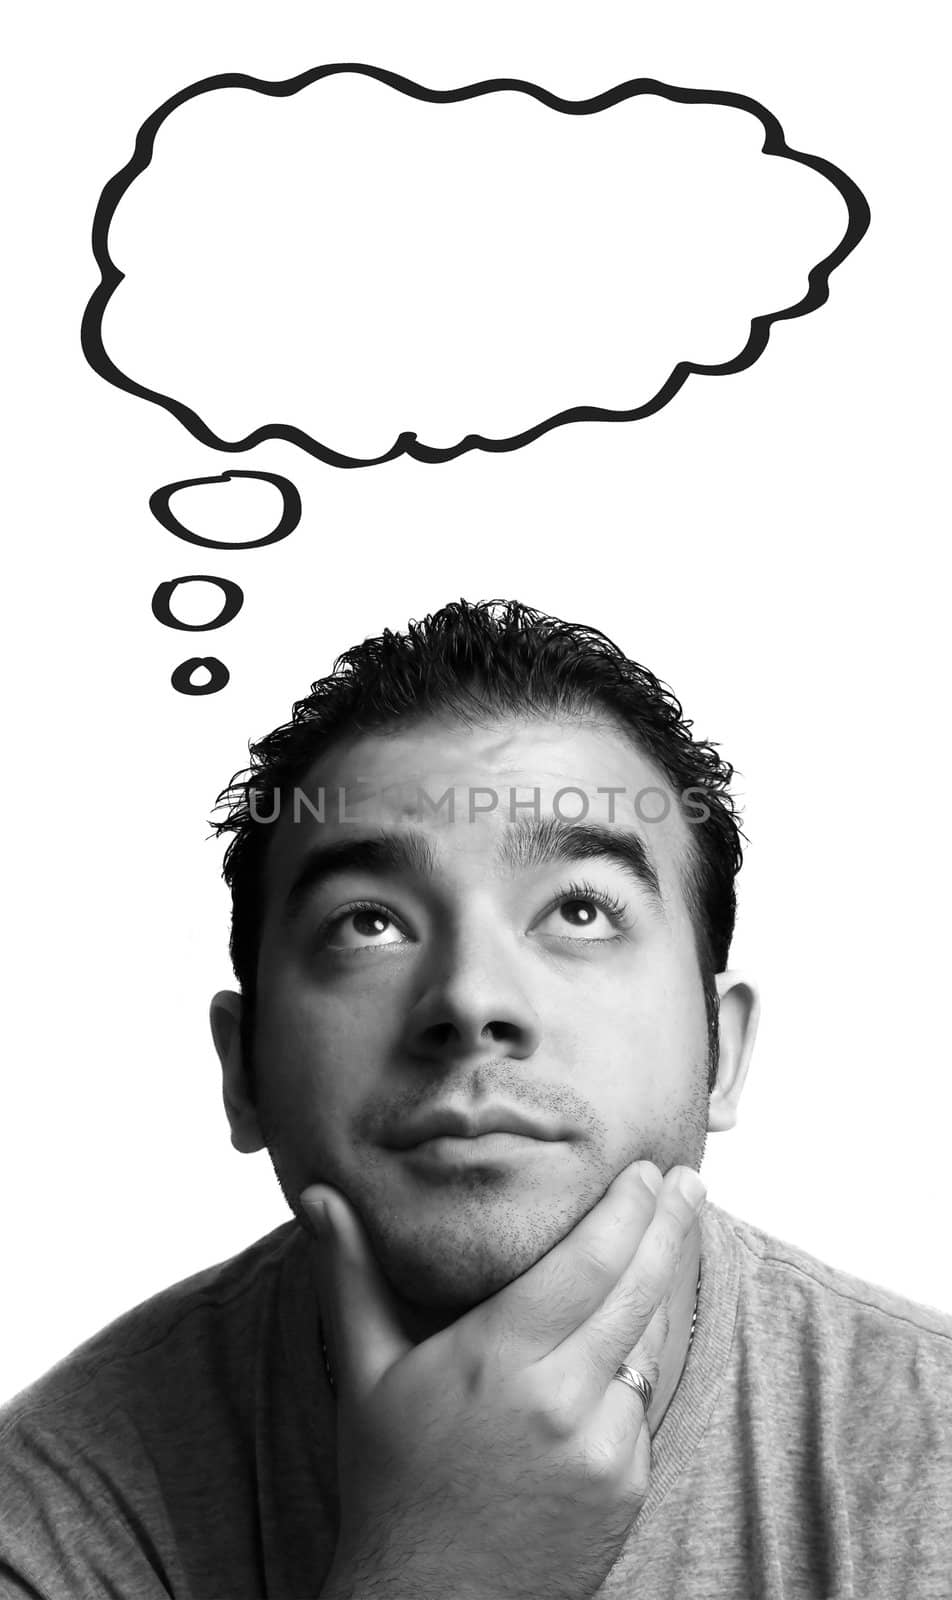 A man with his hand on his chin thinks deeply about something. Blank thought bubble above for your text or image.